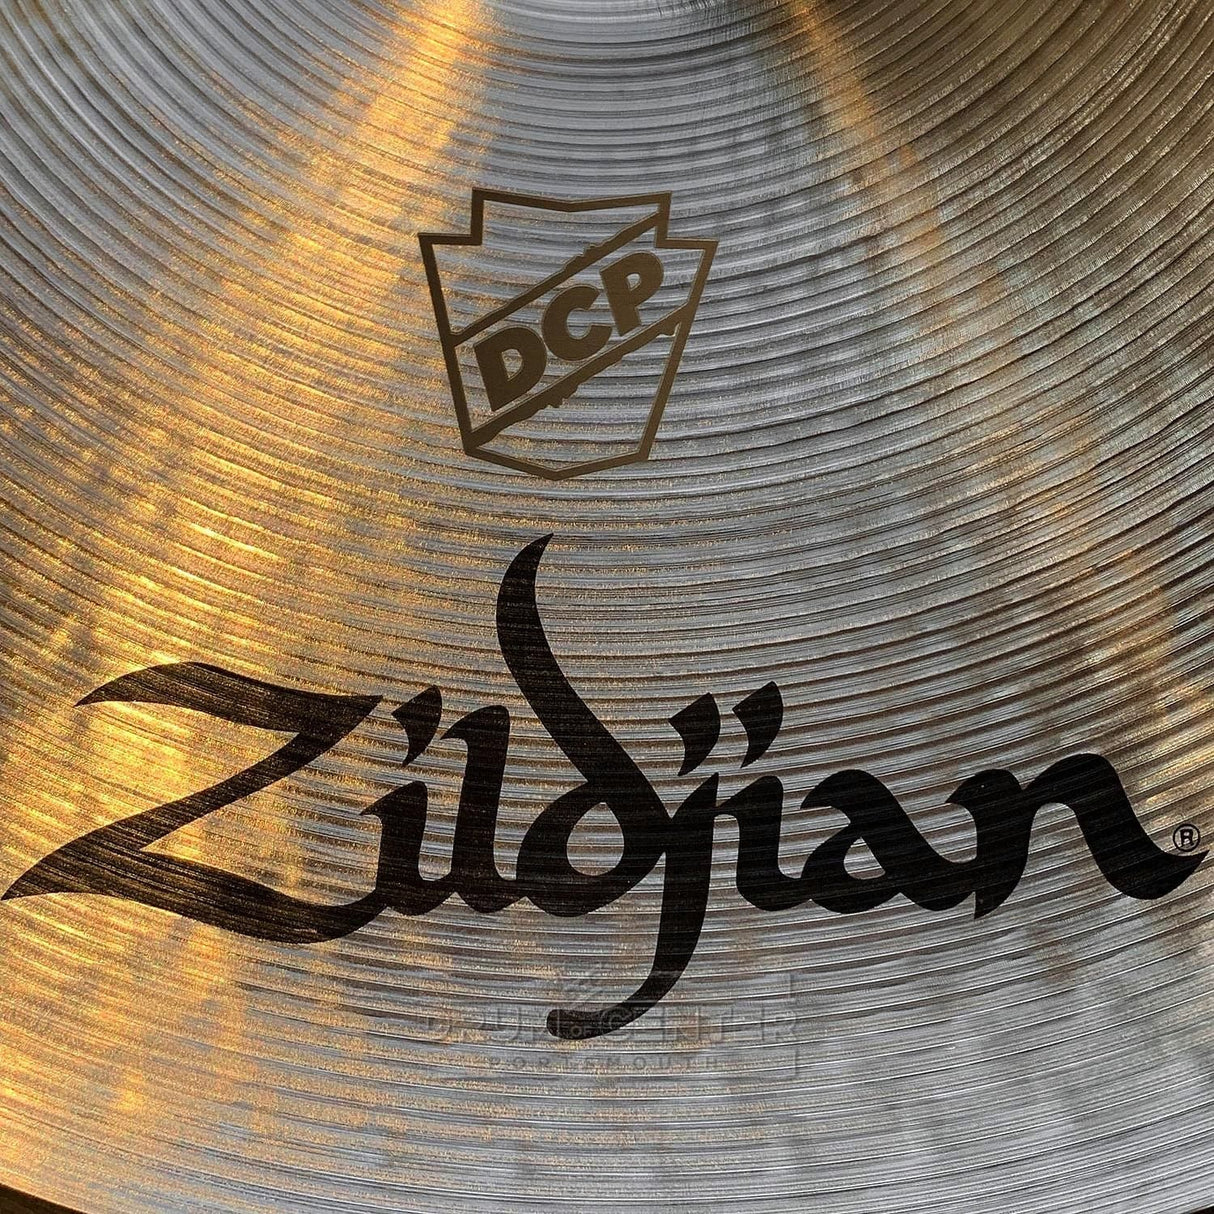 Zildjian DCP 10th Anniversary Special Edition Ride Cymbal 22" - "The Professor"